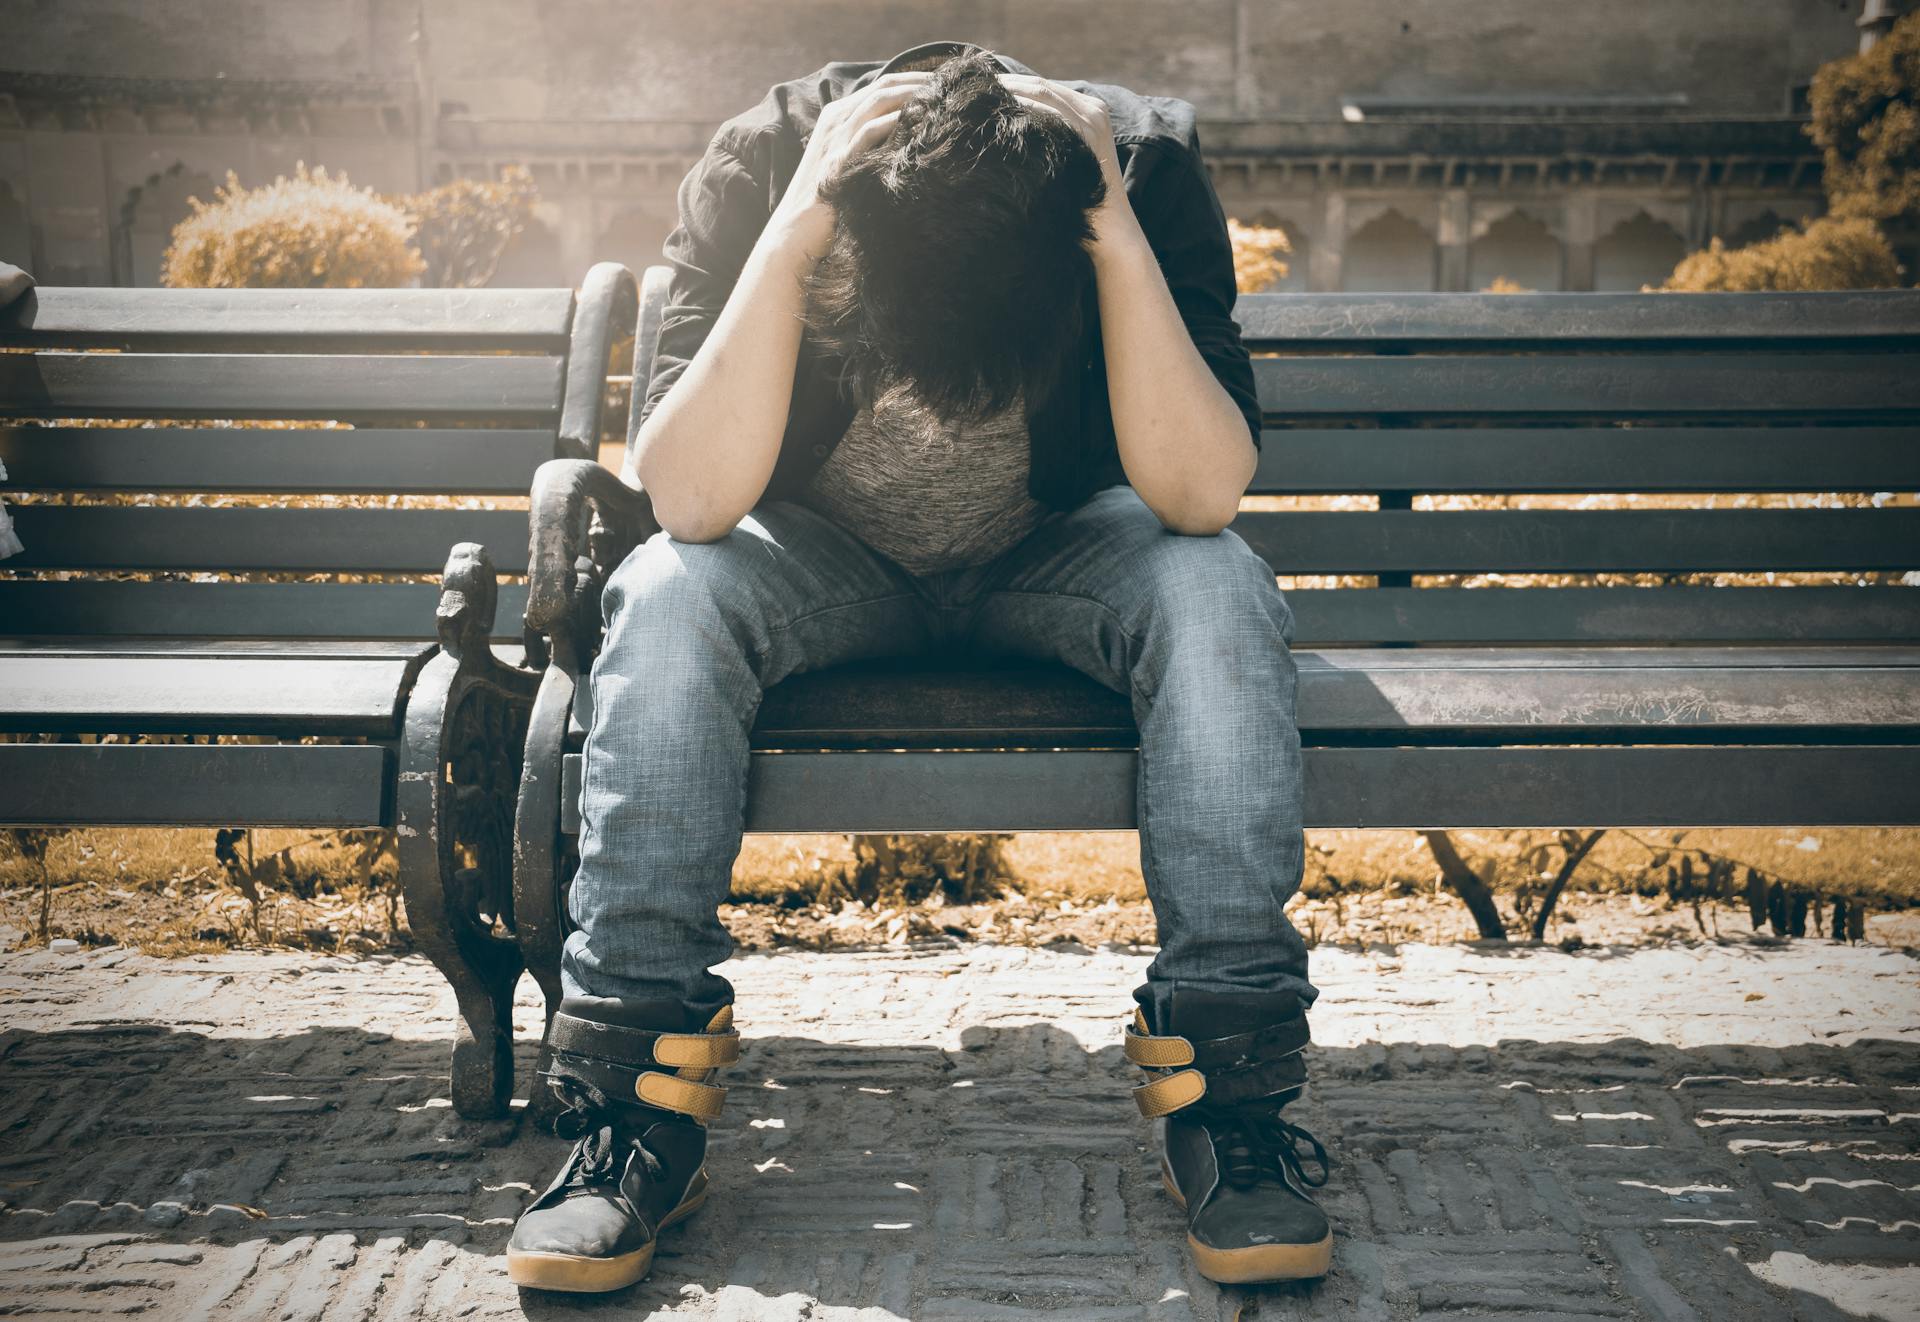 A man sitting on a bench with his head bowed down | Source: Pexels